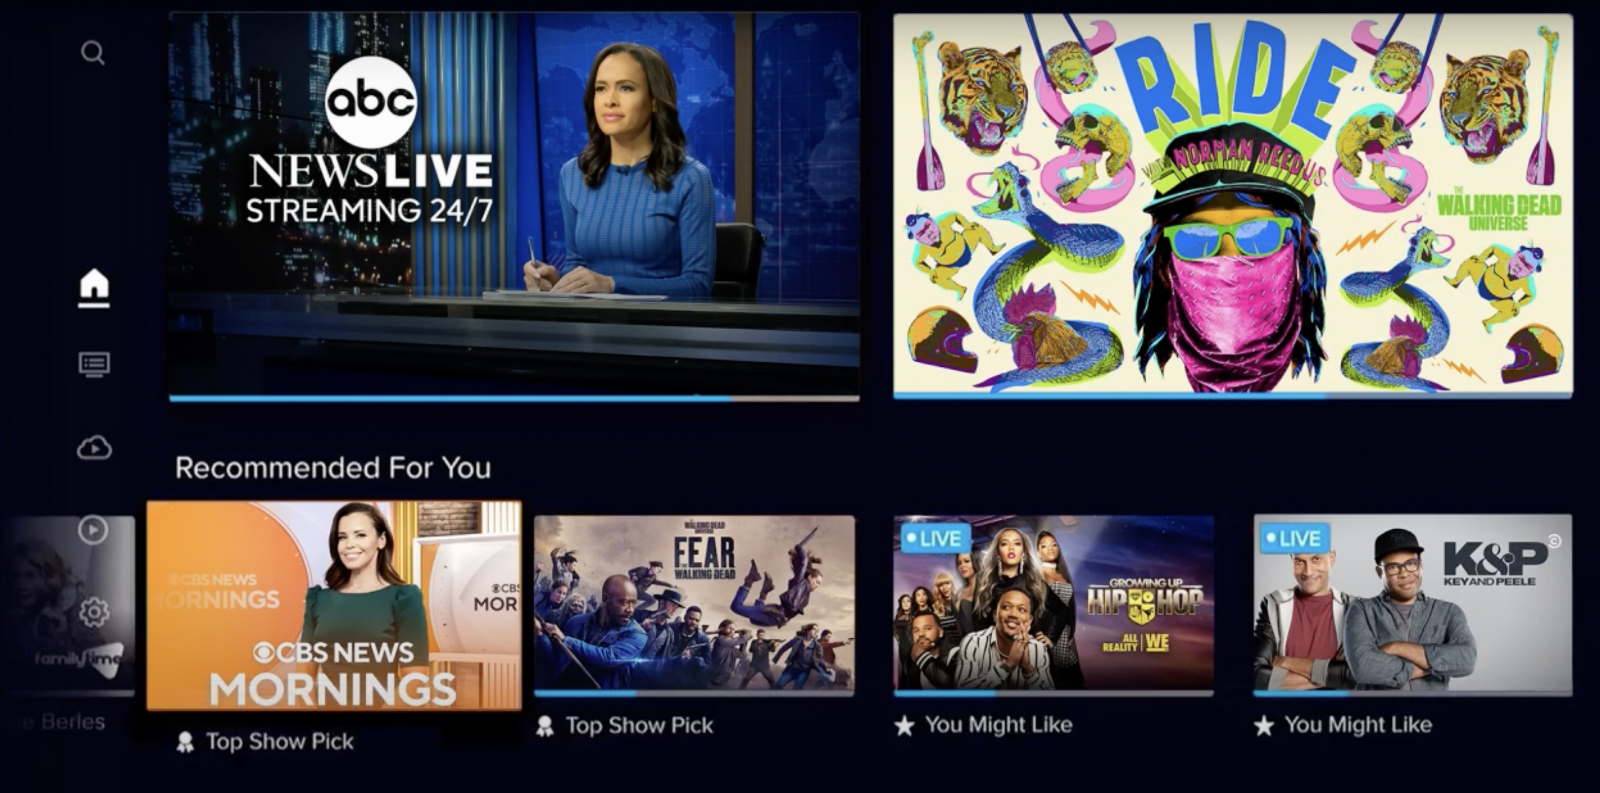 Sling TV launches free ad-supported streaming TV service ‘Sling Freestream’